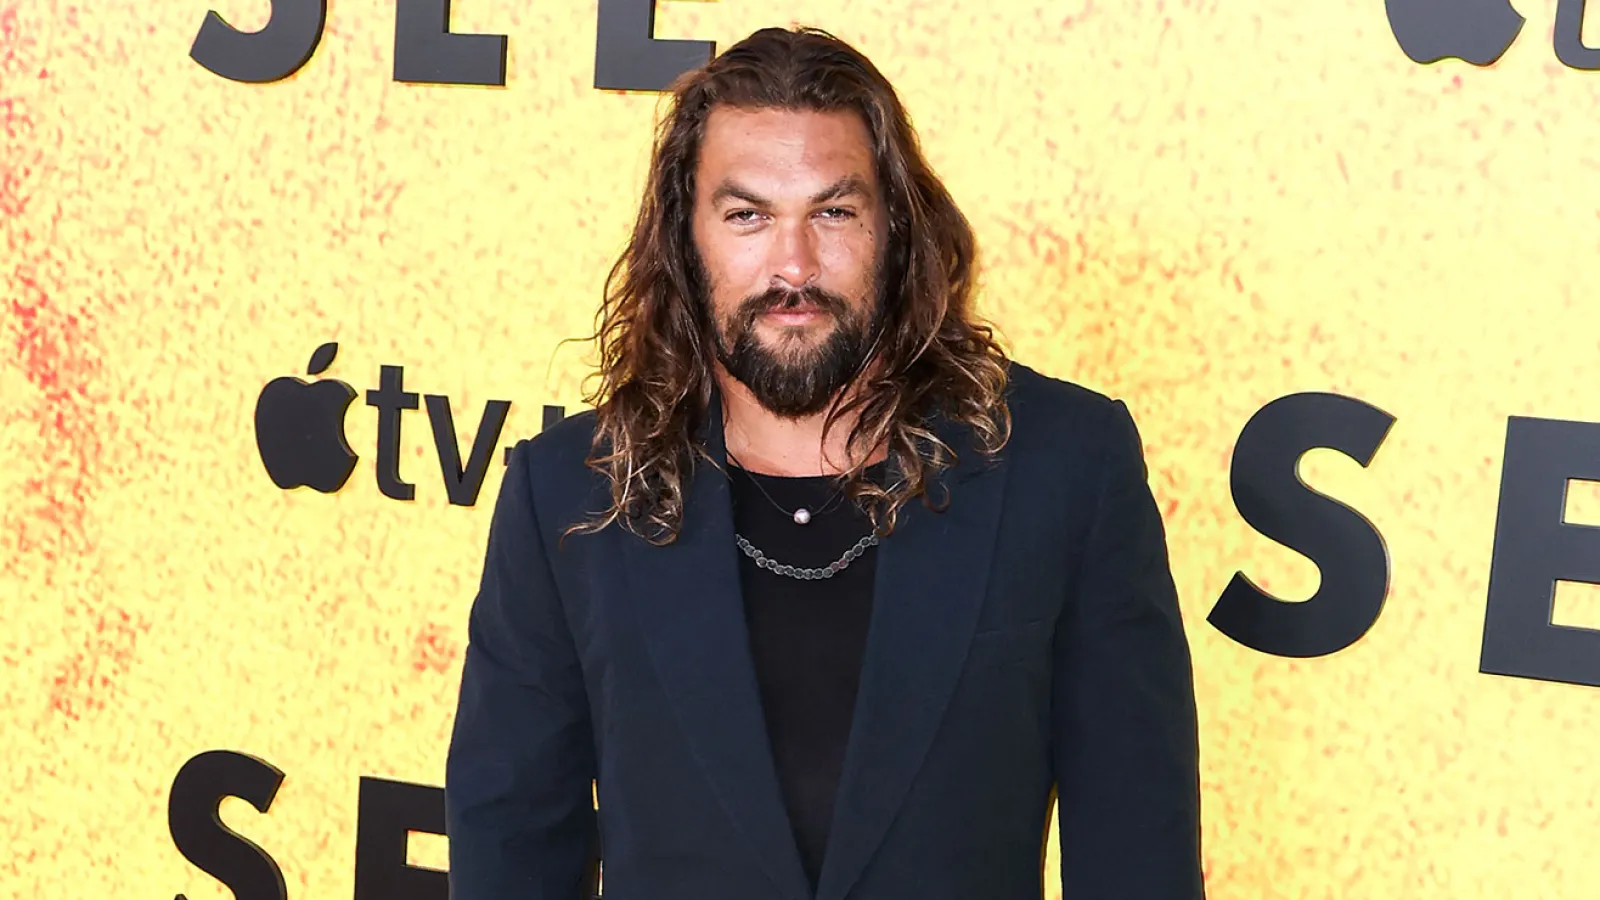 Aquaman actor Jason Momoa exposes butt naked cheek as he goes for fishing